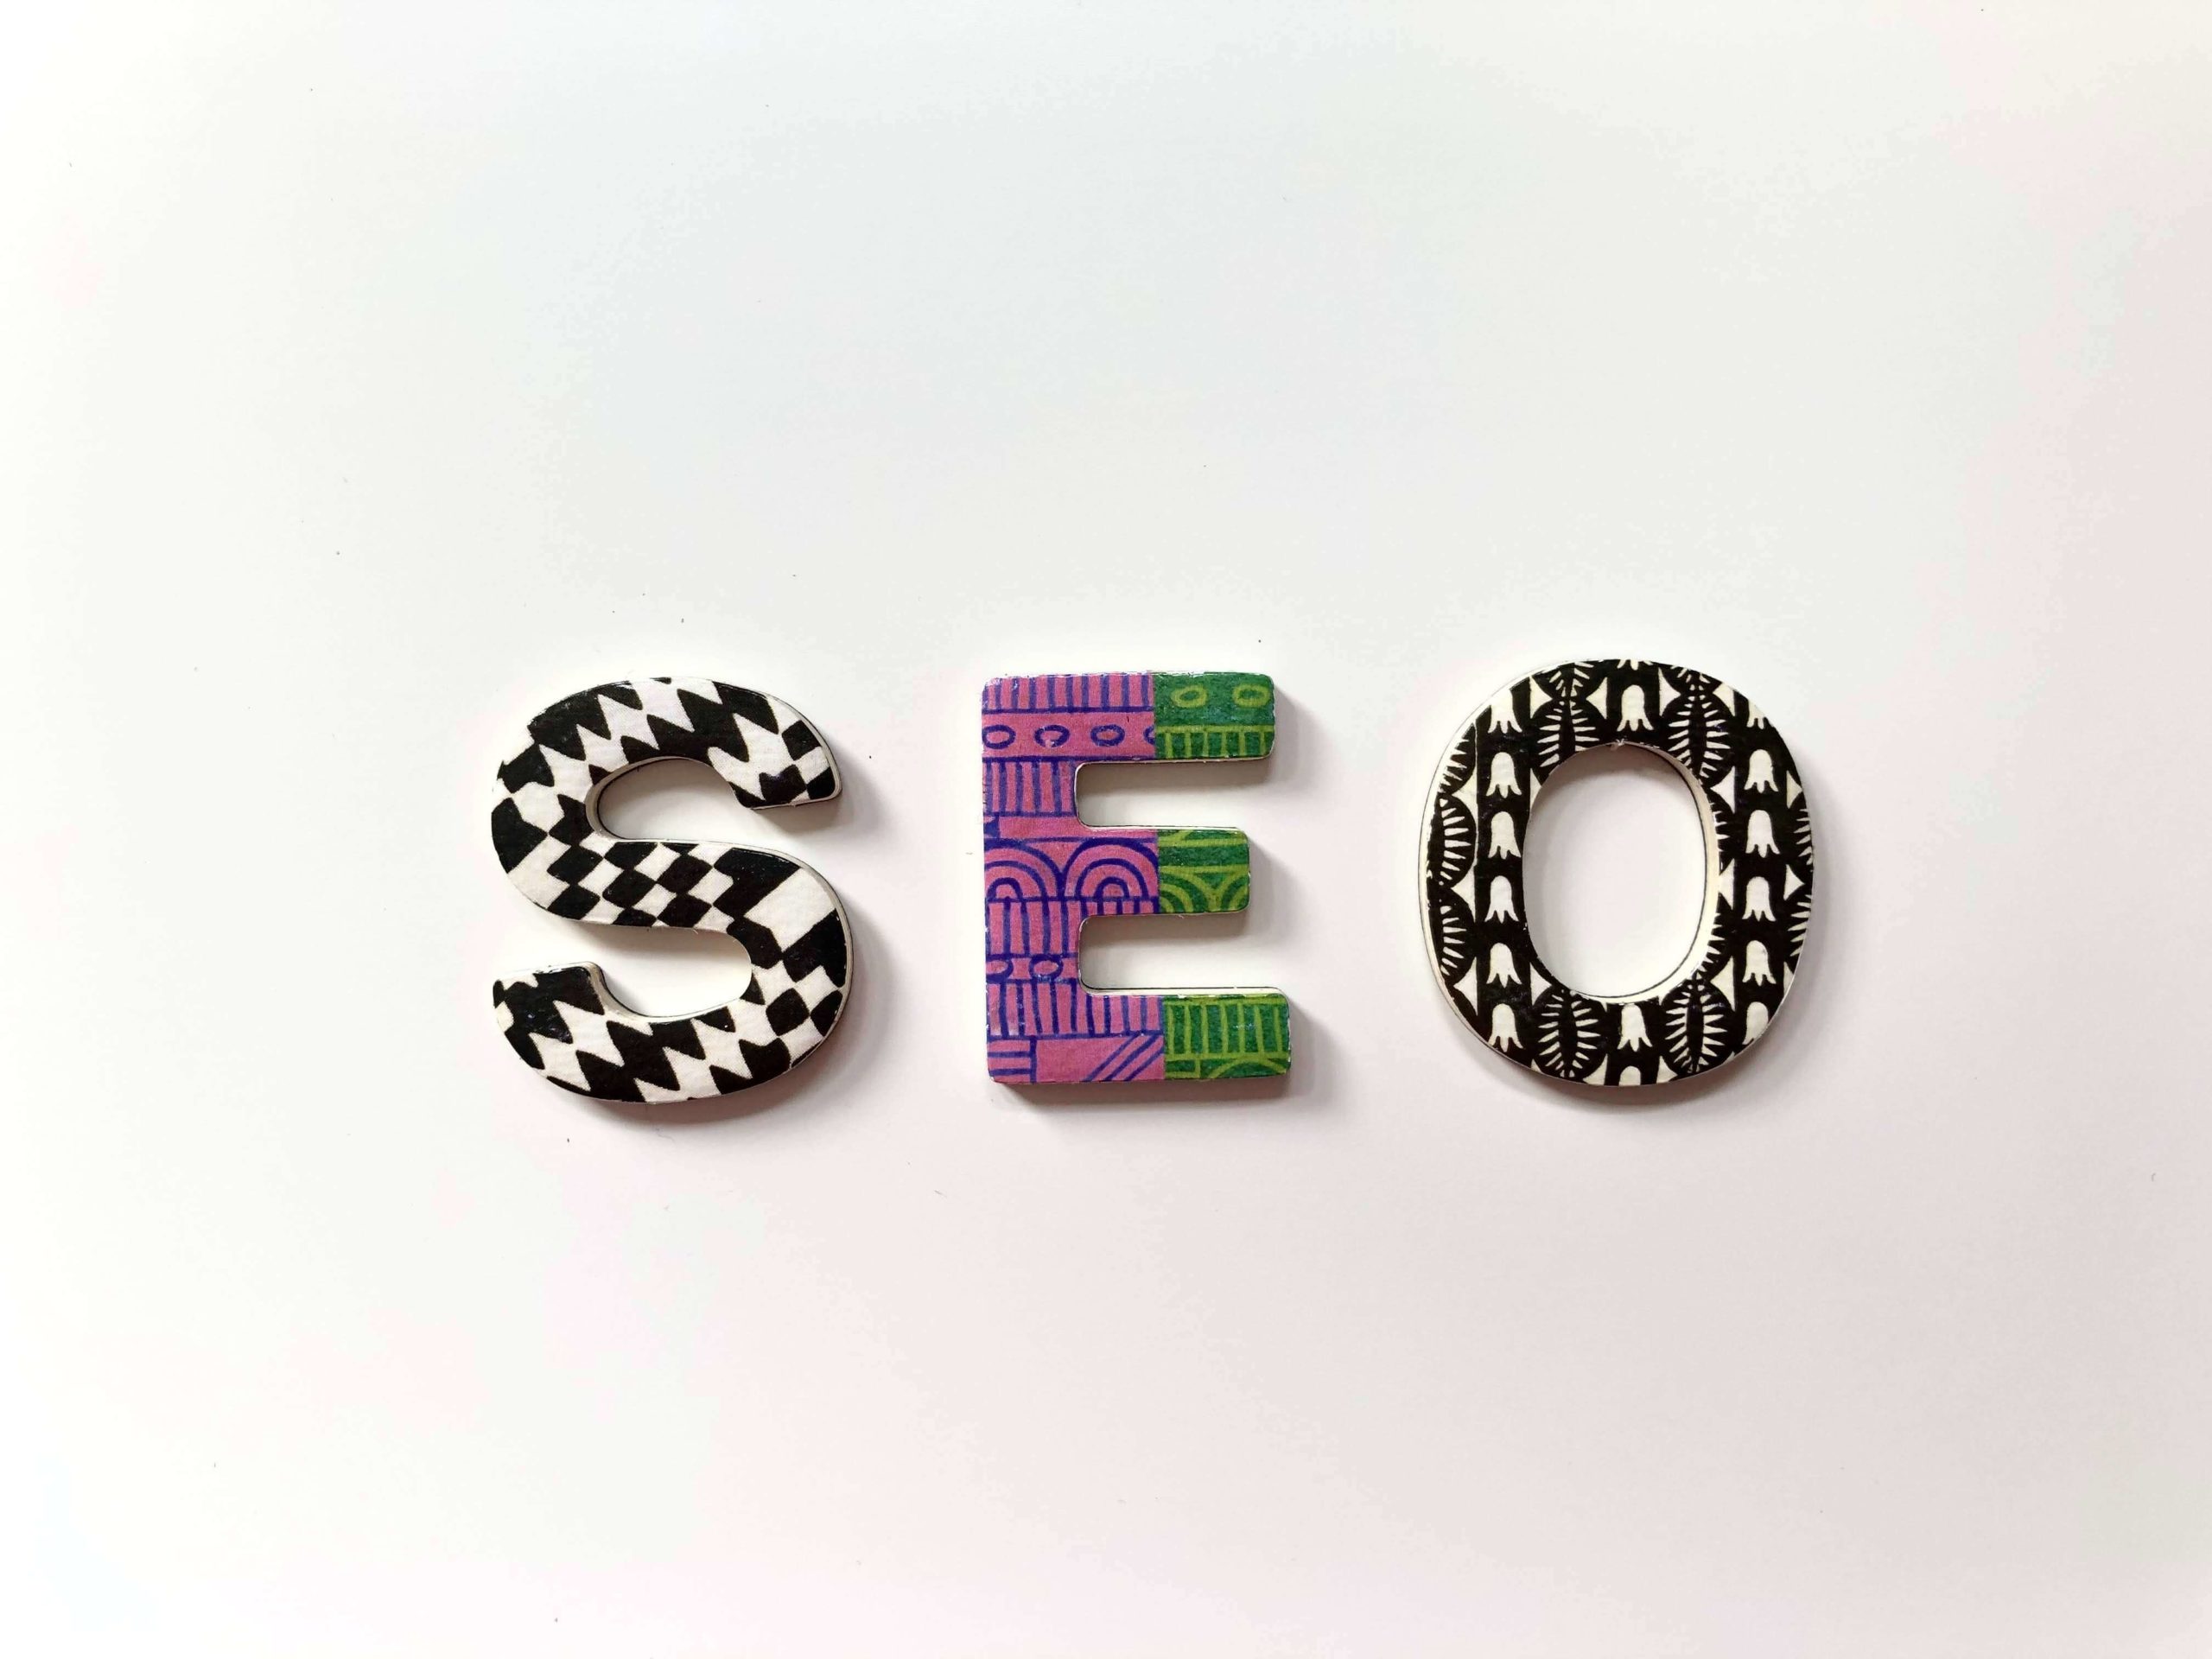 Top 15 SEO blogs you should be reading in 2015